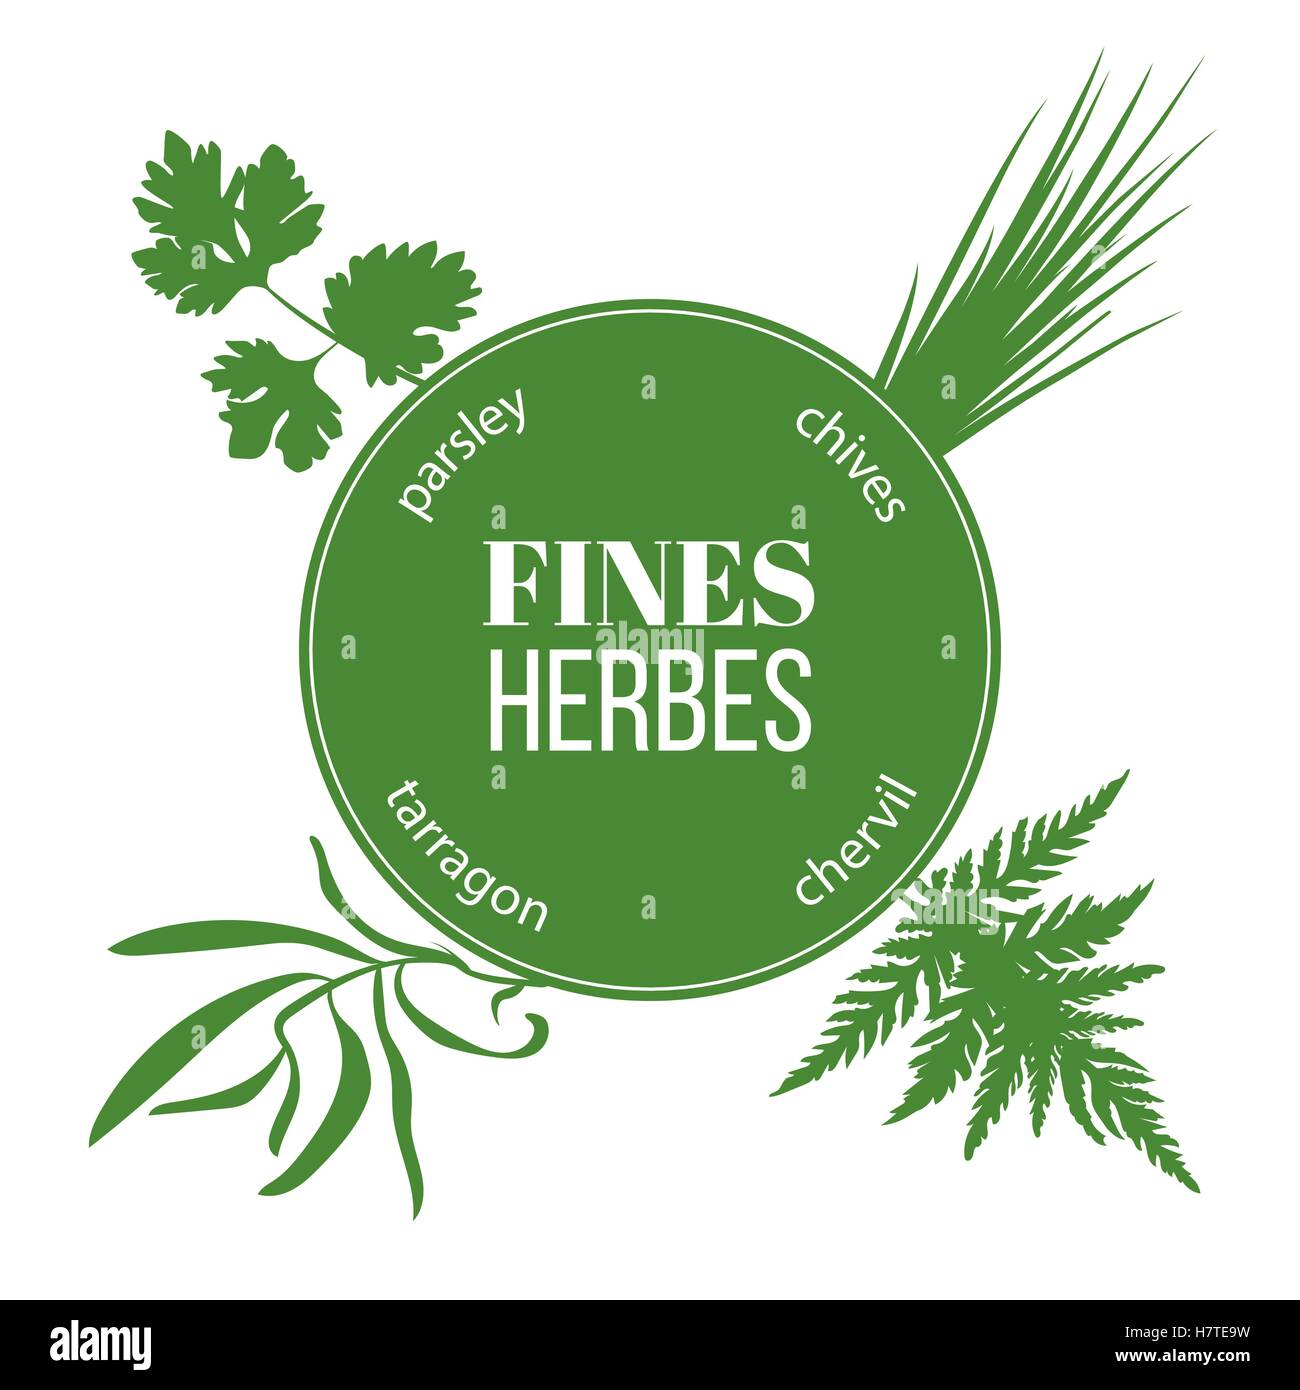 Fines herbes flat silhouettes Stock Vector